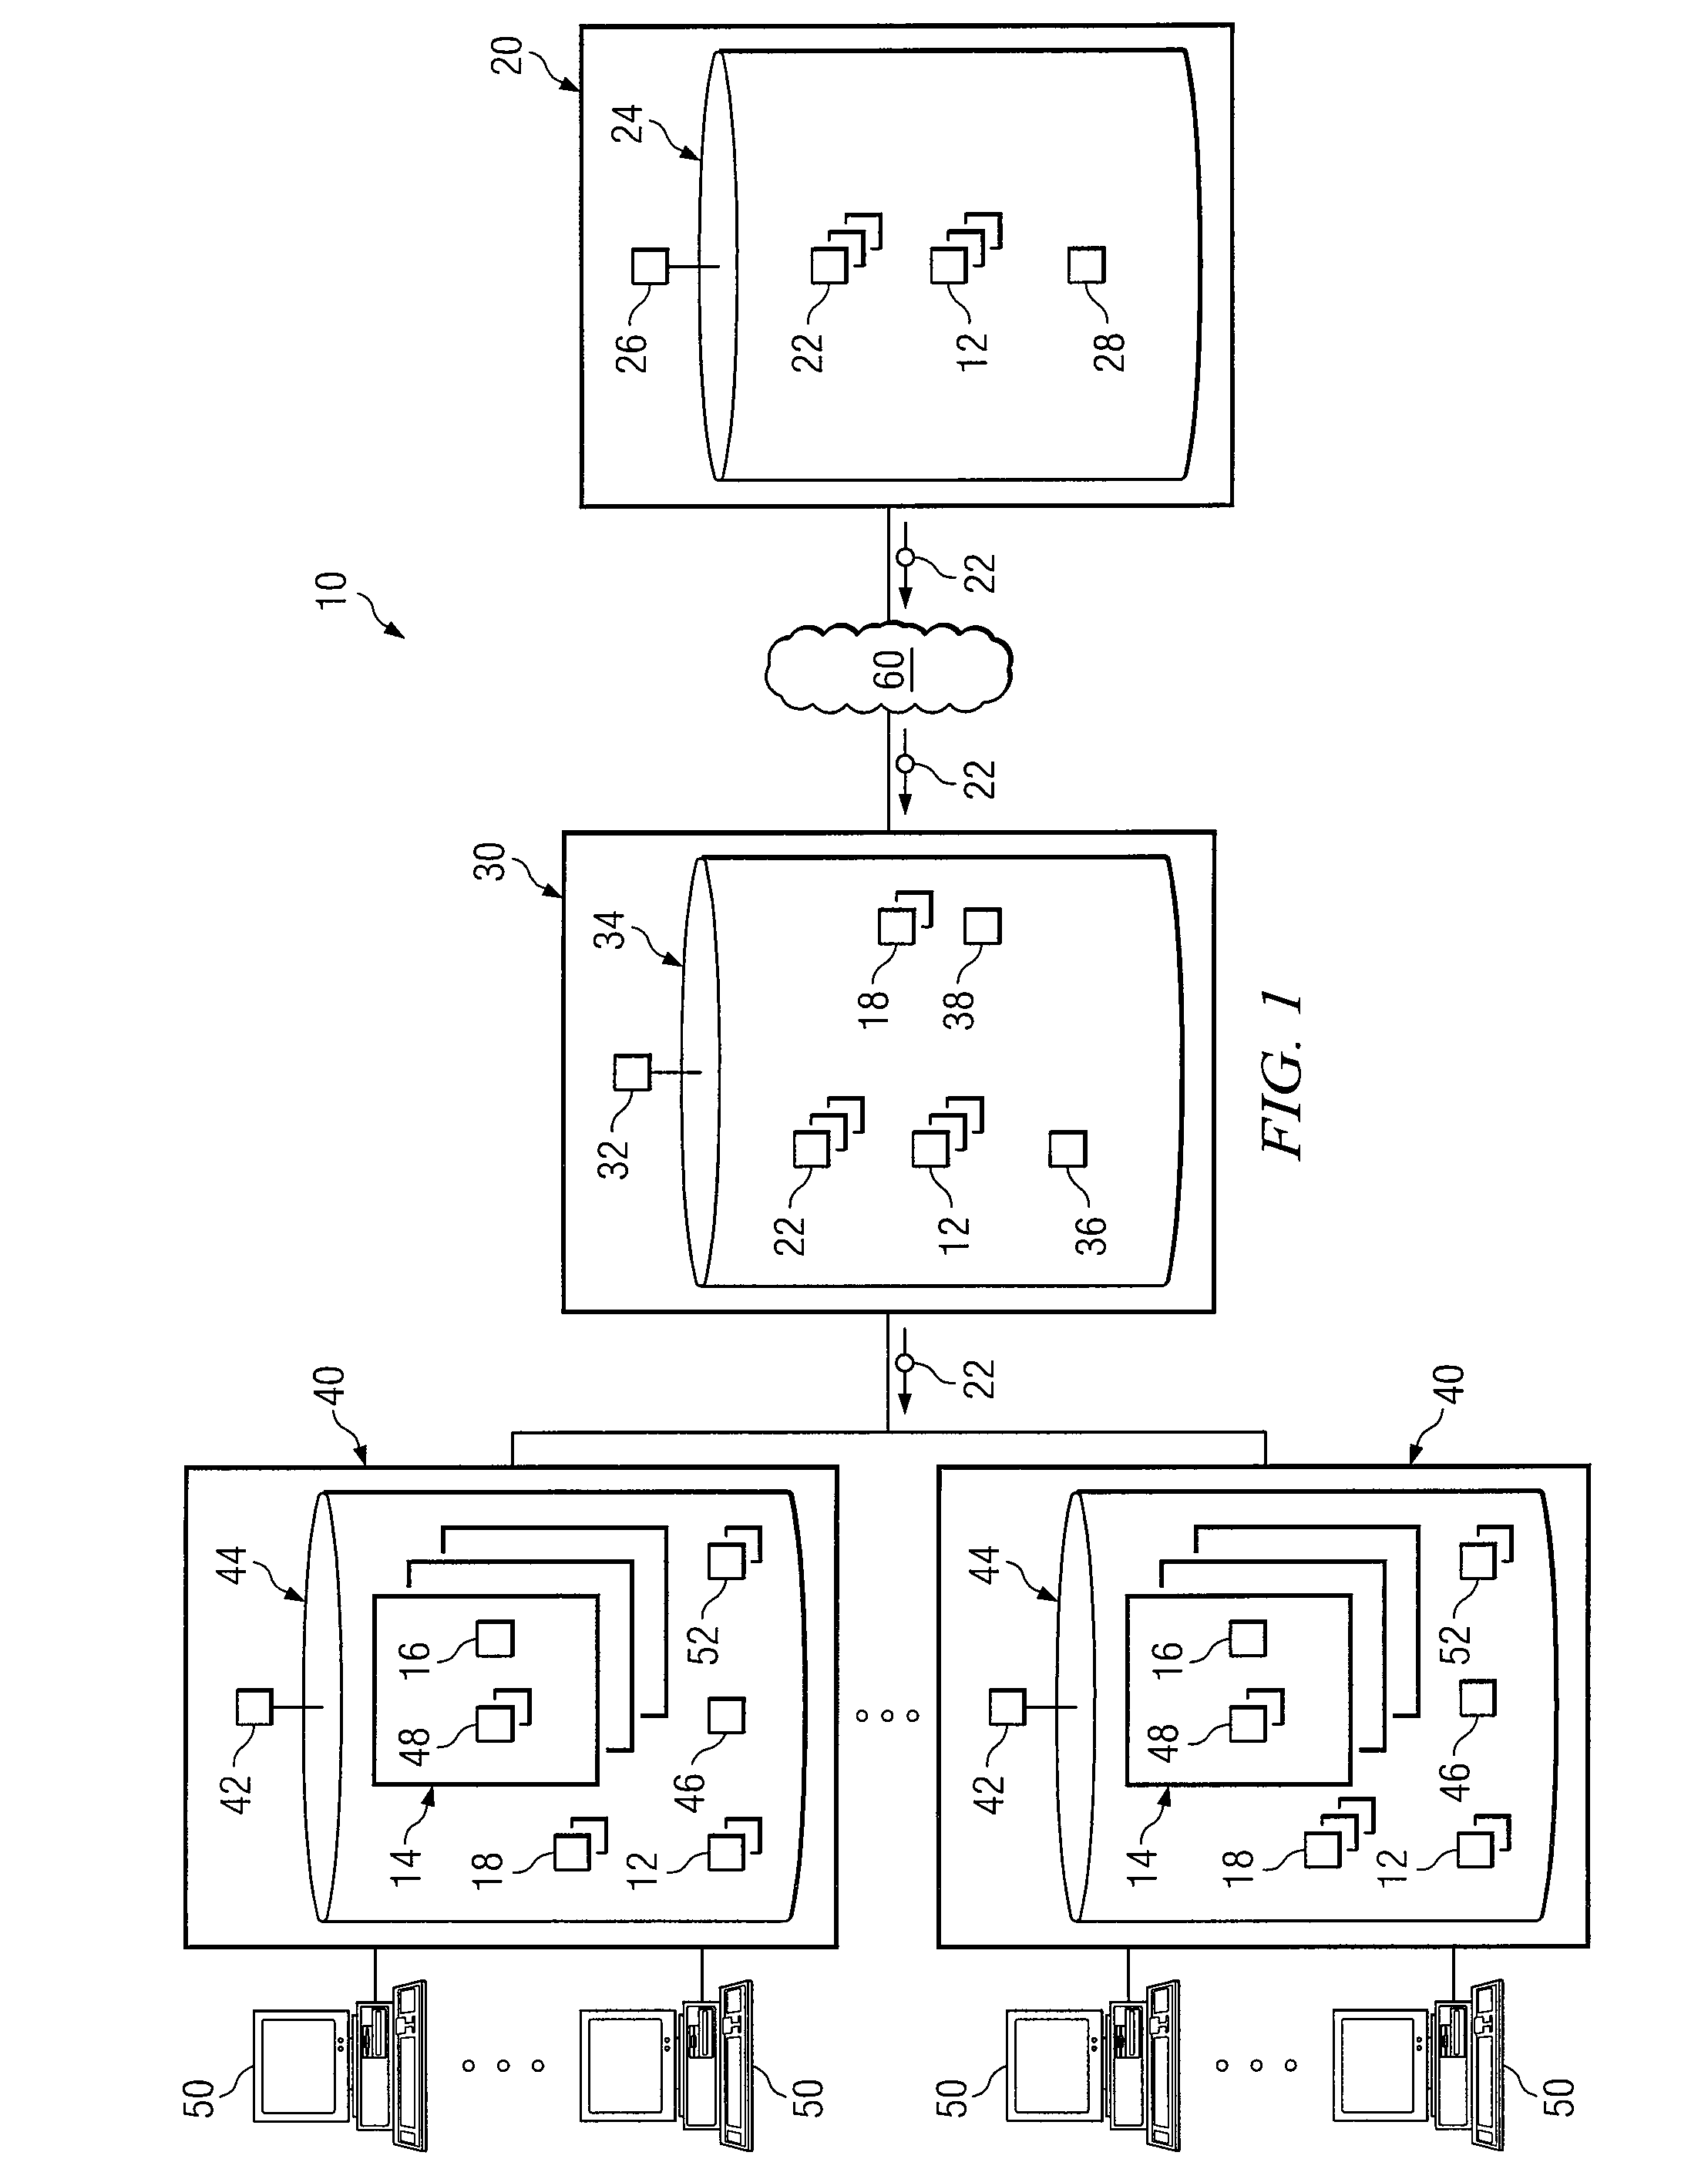 System and Method for Securely Updating License Files in an Automated Licensing System